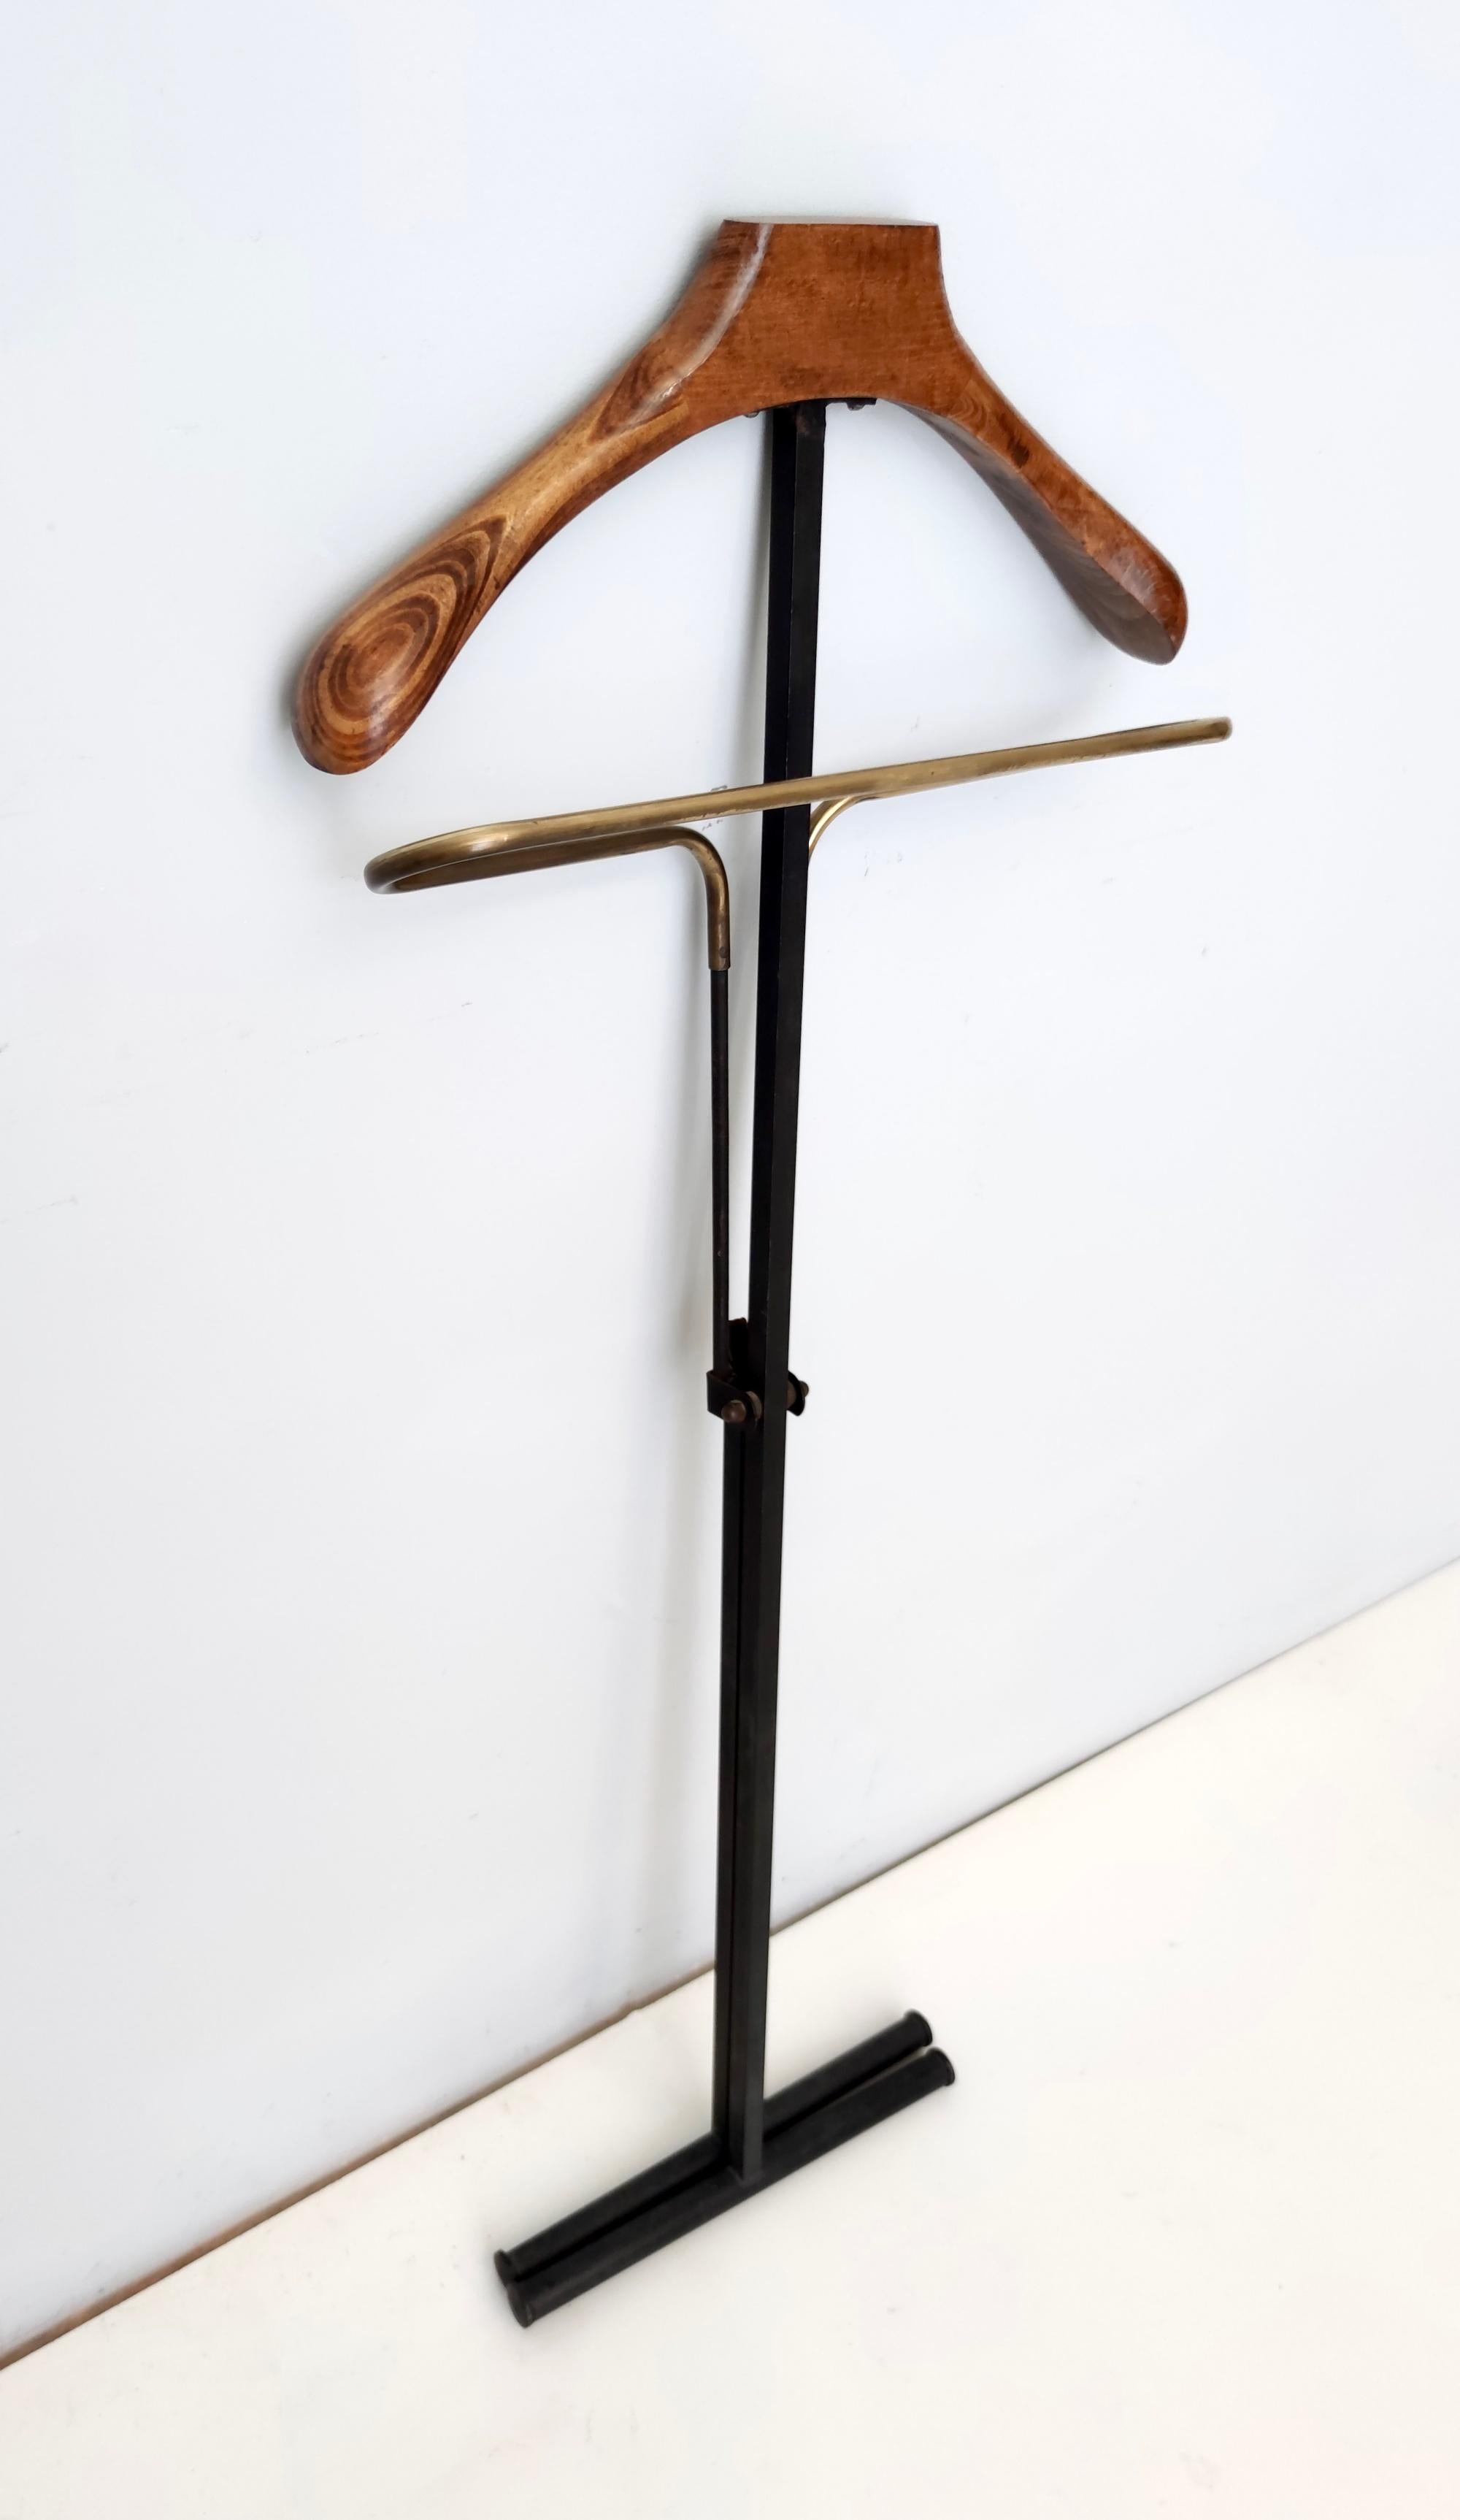 Made in Italy, 1950s - 1960s.
It features a beech, varnished metal and brass frame. 
This valet stand is a vintage piece, therefore it might show slight traces of use, but it can be considered as in excellent original condition. 

Measures: Width: